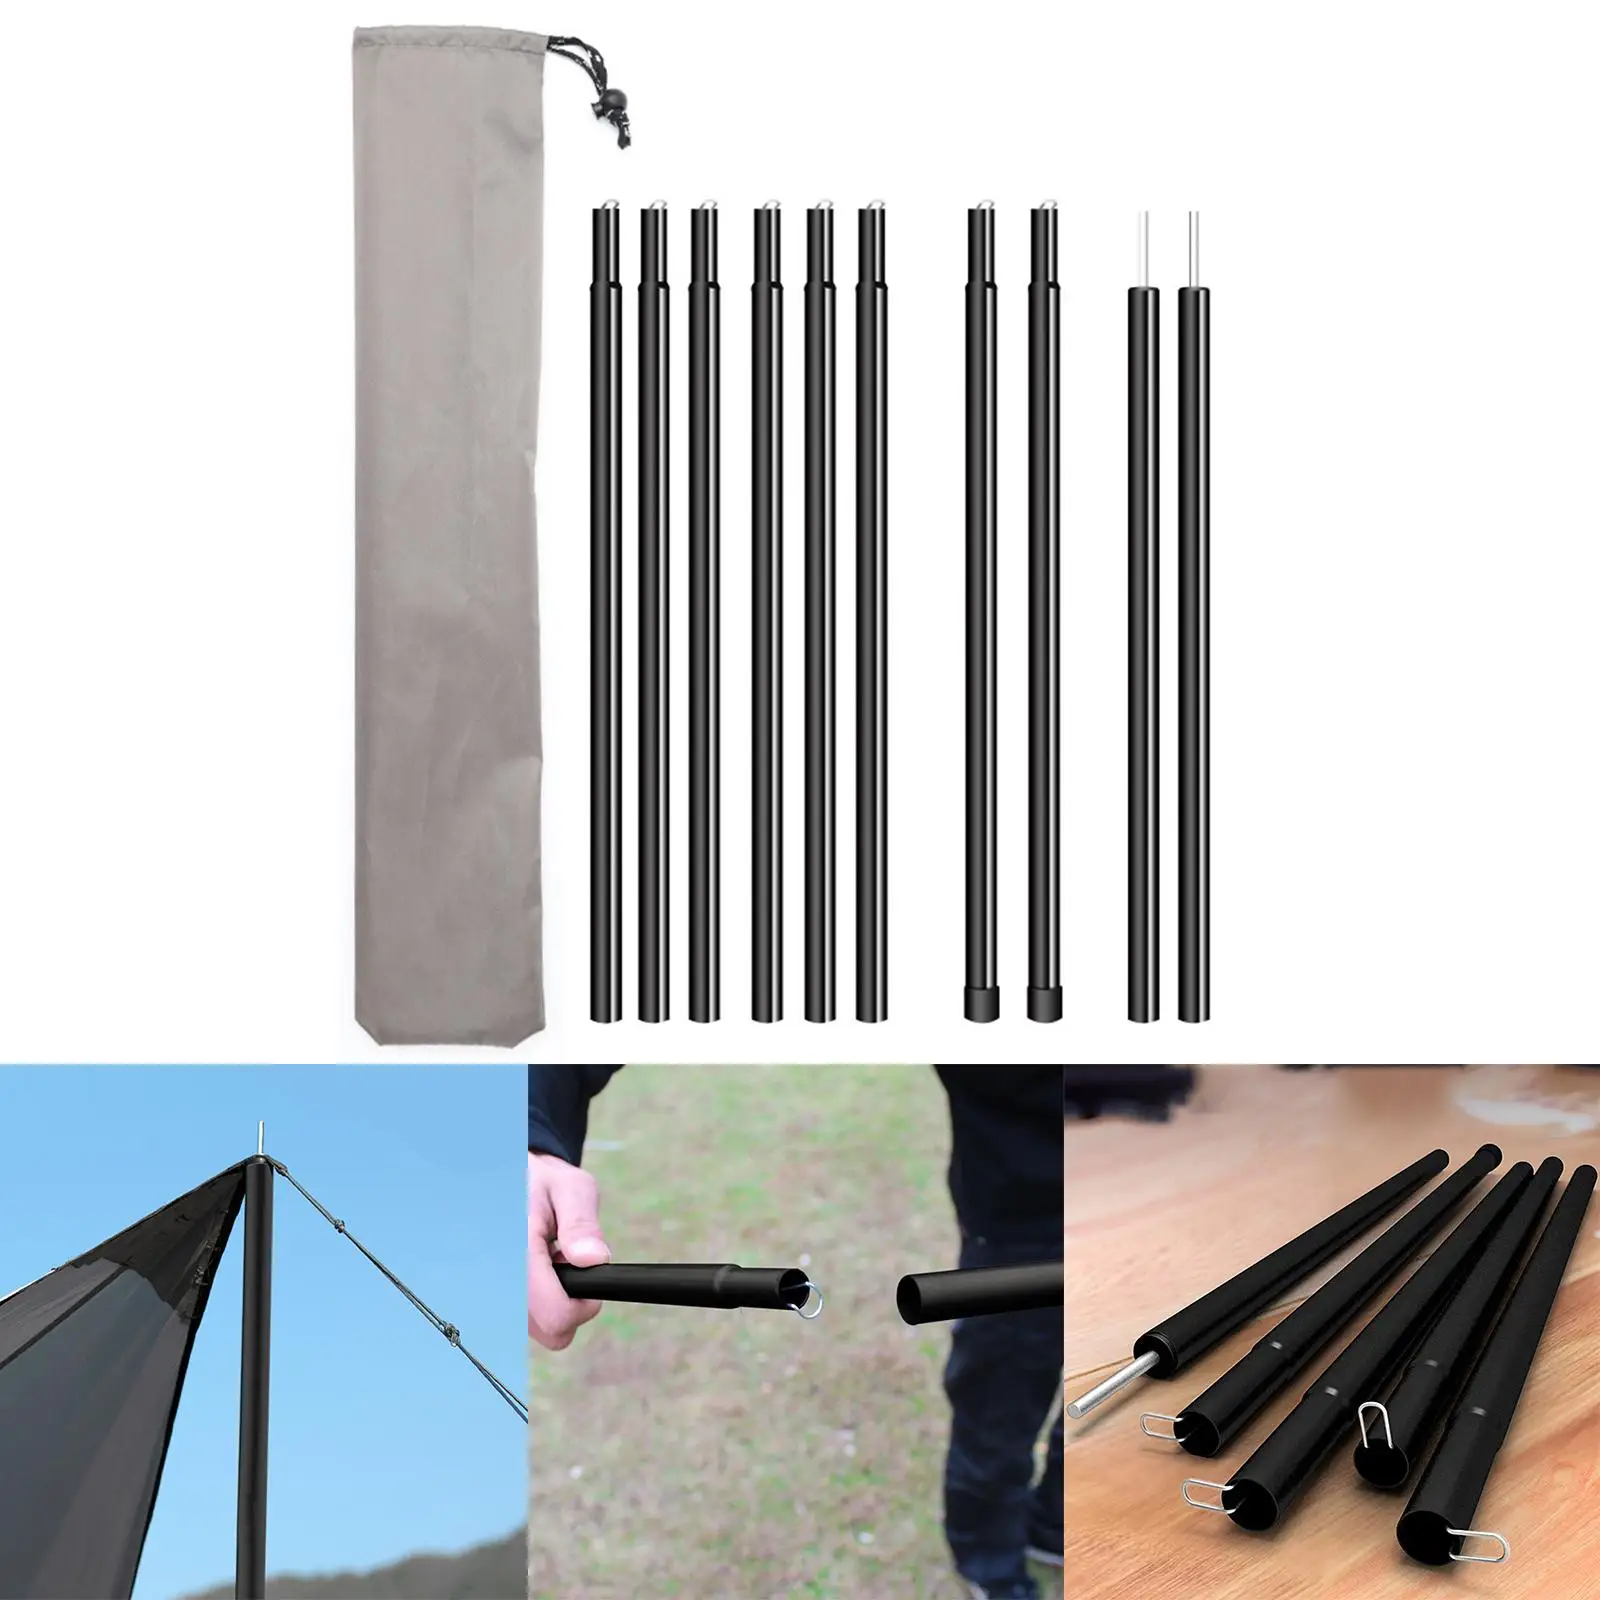 2 Pieces Universal Tent Poles Lightweight Adjustable for Camping Replacement Sun